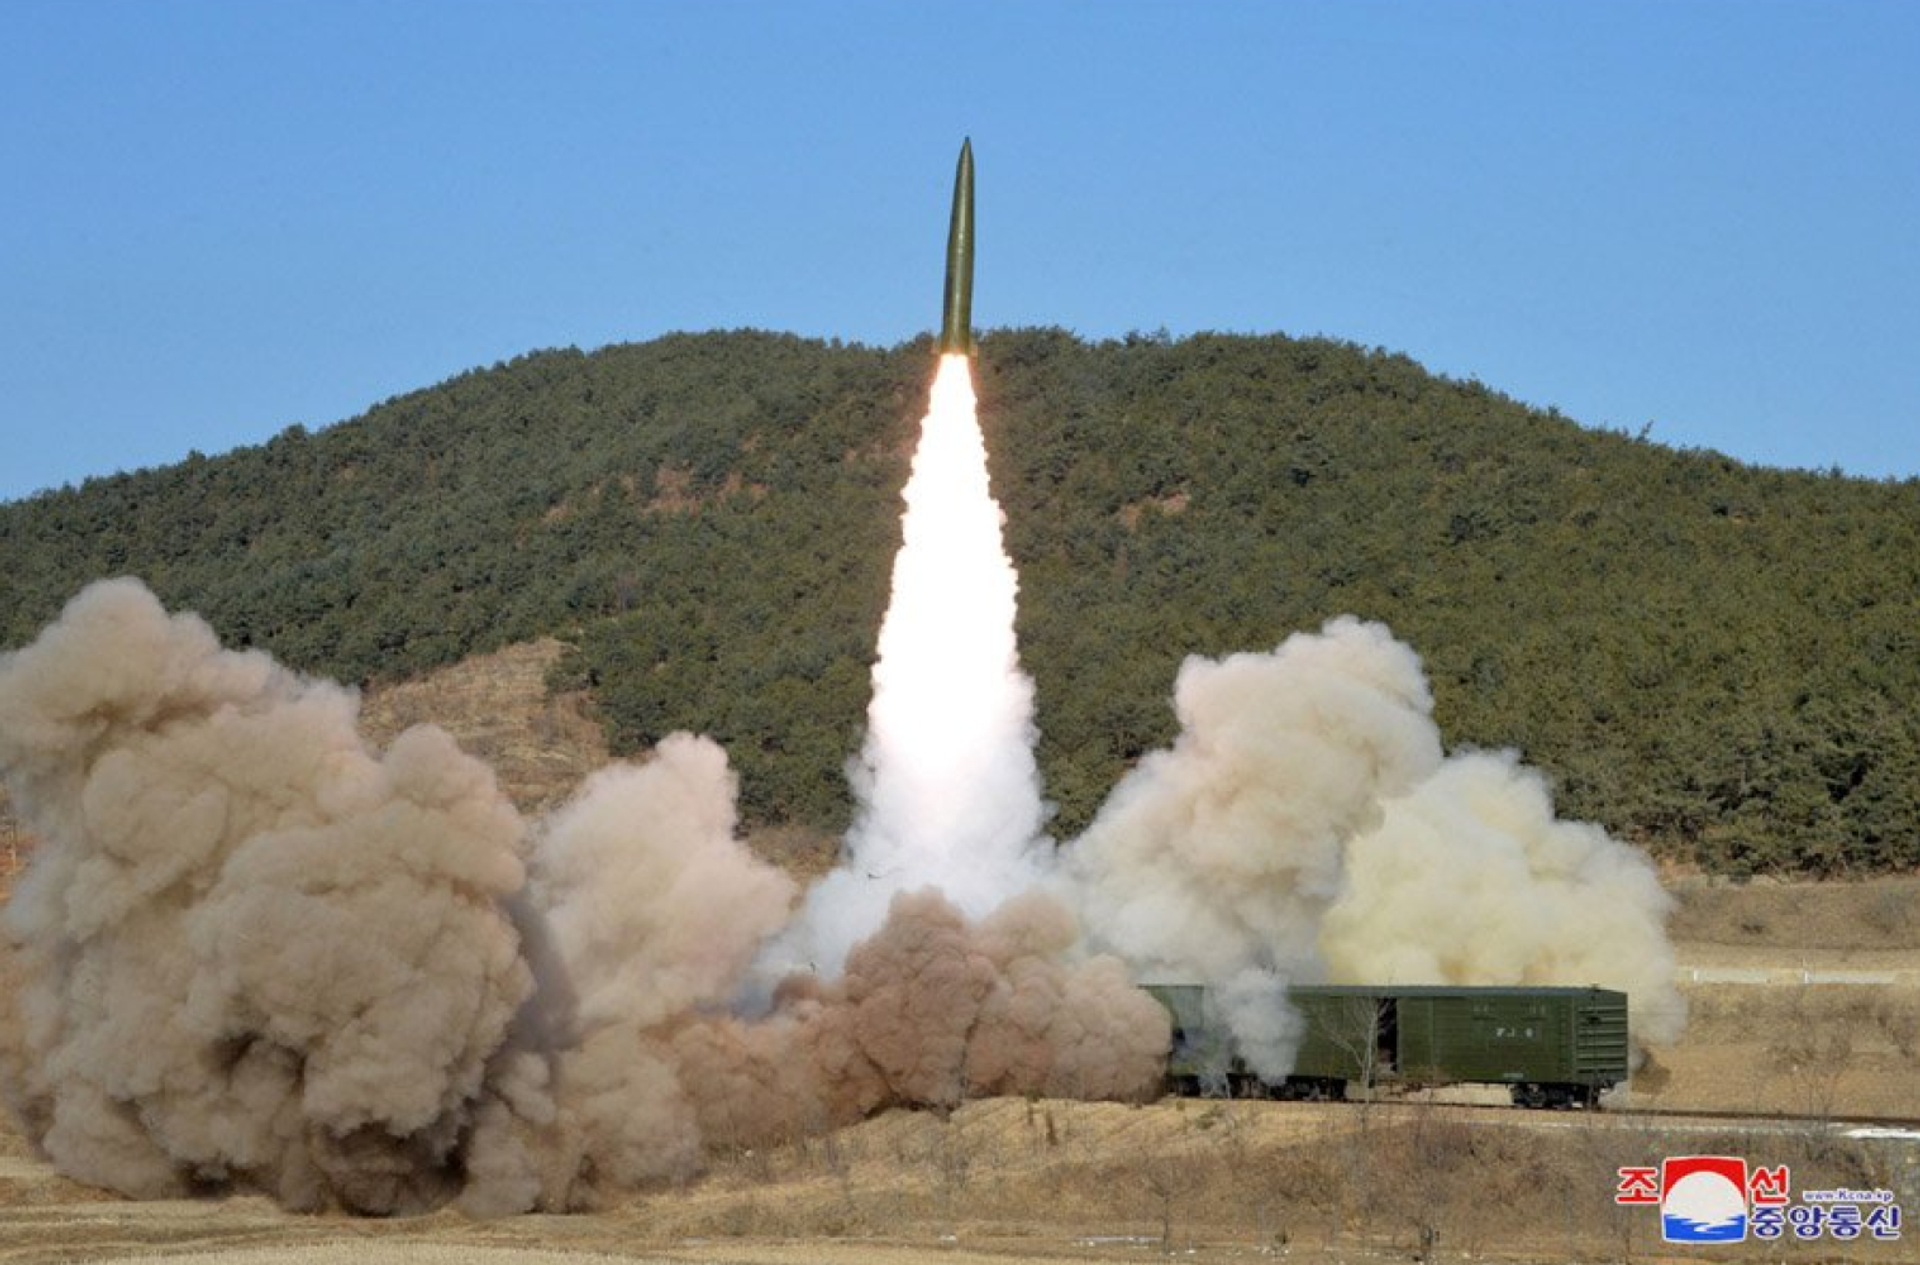 A DPRK railway-borne ballistic missile is launched in a January 14, 2022, test in western North Korea - Sputnik International, 1920, 15.01.2022